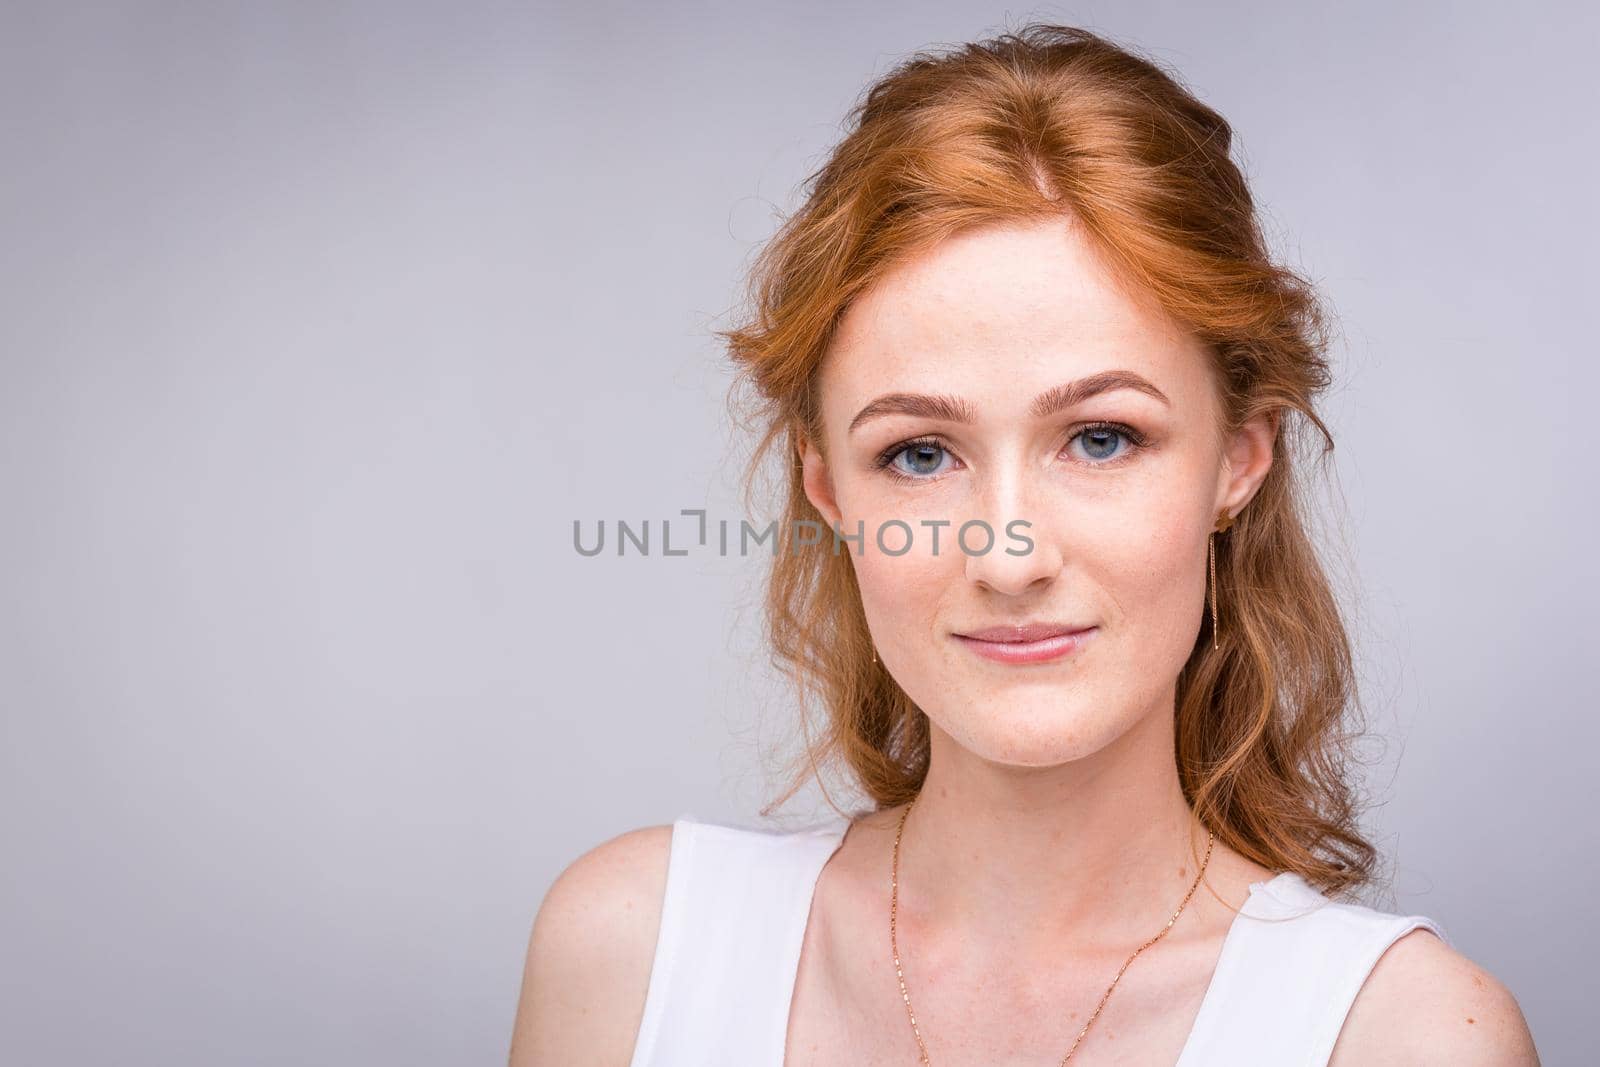 Closeup portrait young, beautiful business woman, student with lred, curly hair and freckles on face on gray background in the studio. Dressed in white blouse with short sleeves about open shoulders by Tomashevska